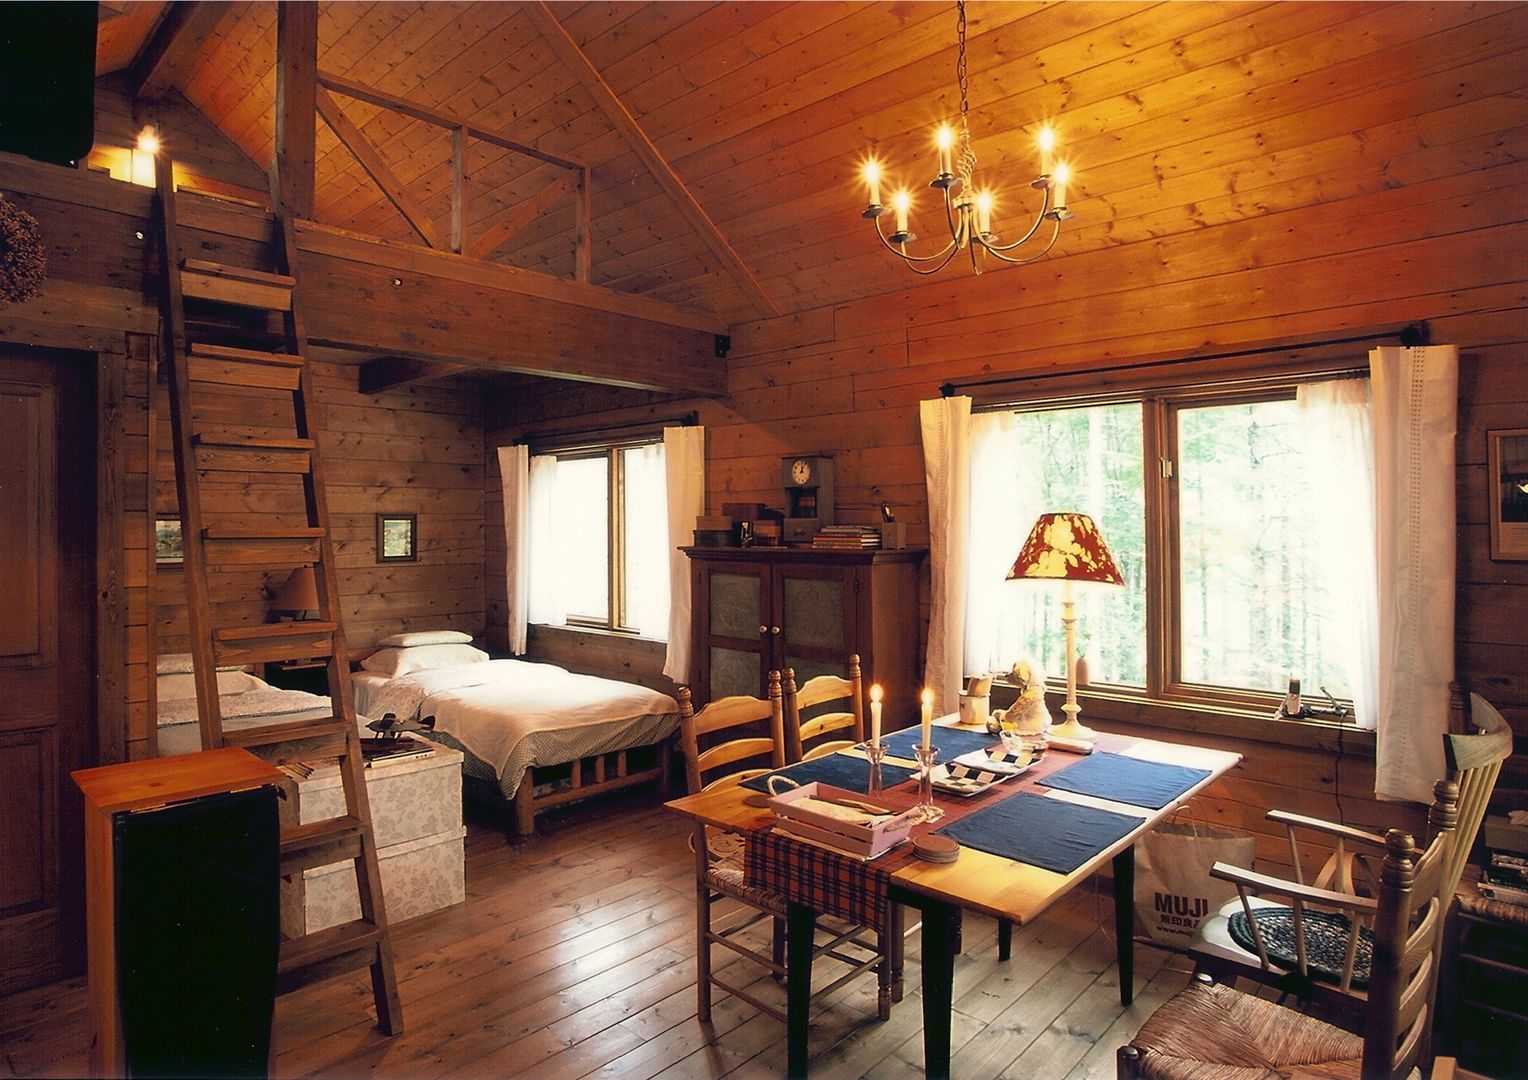 Small Cottage at Mt.Yatsugatake, Japan, Cottage Style / コテージスタイル Cottage Style / コテージスタイル Living room